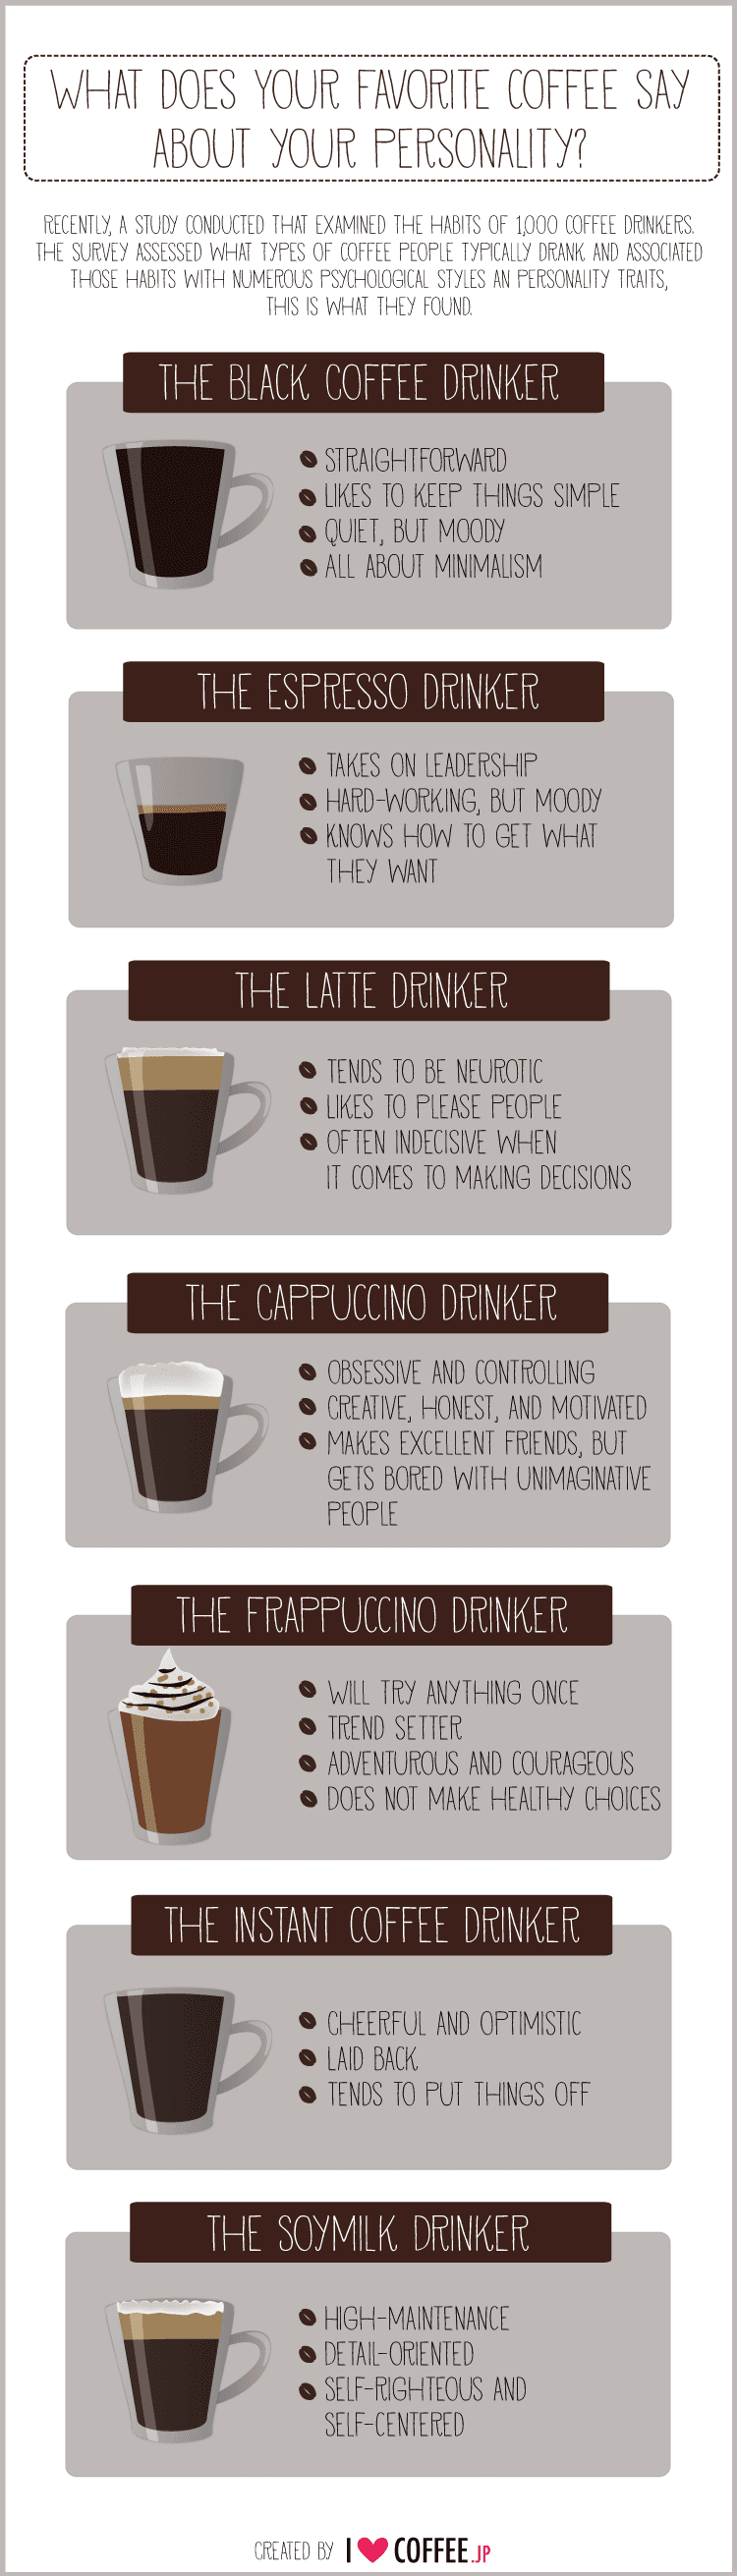 What Does Your Coffee Say About Your Personality?